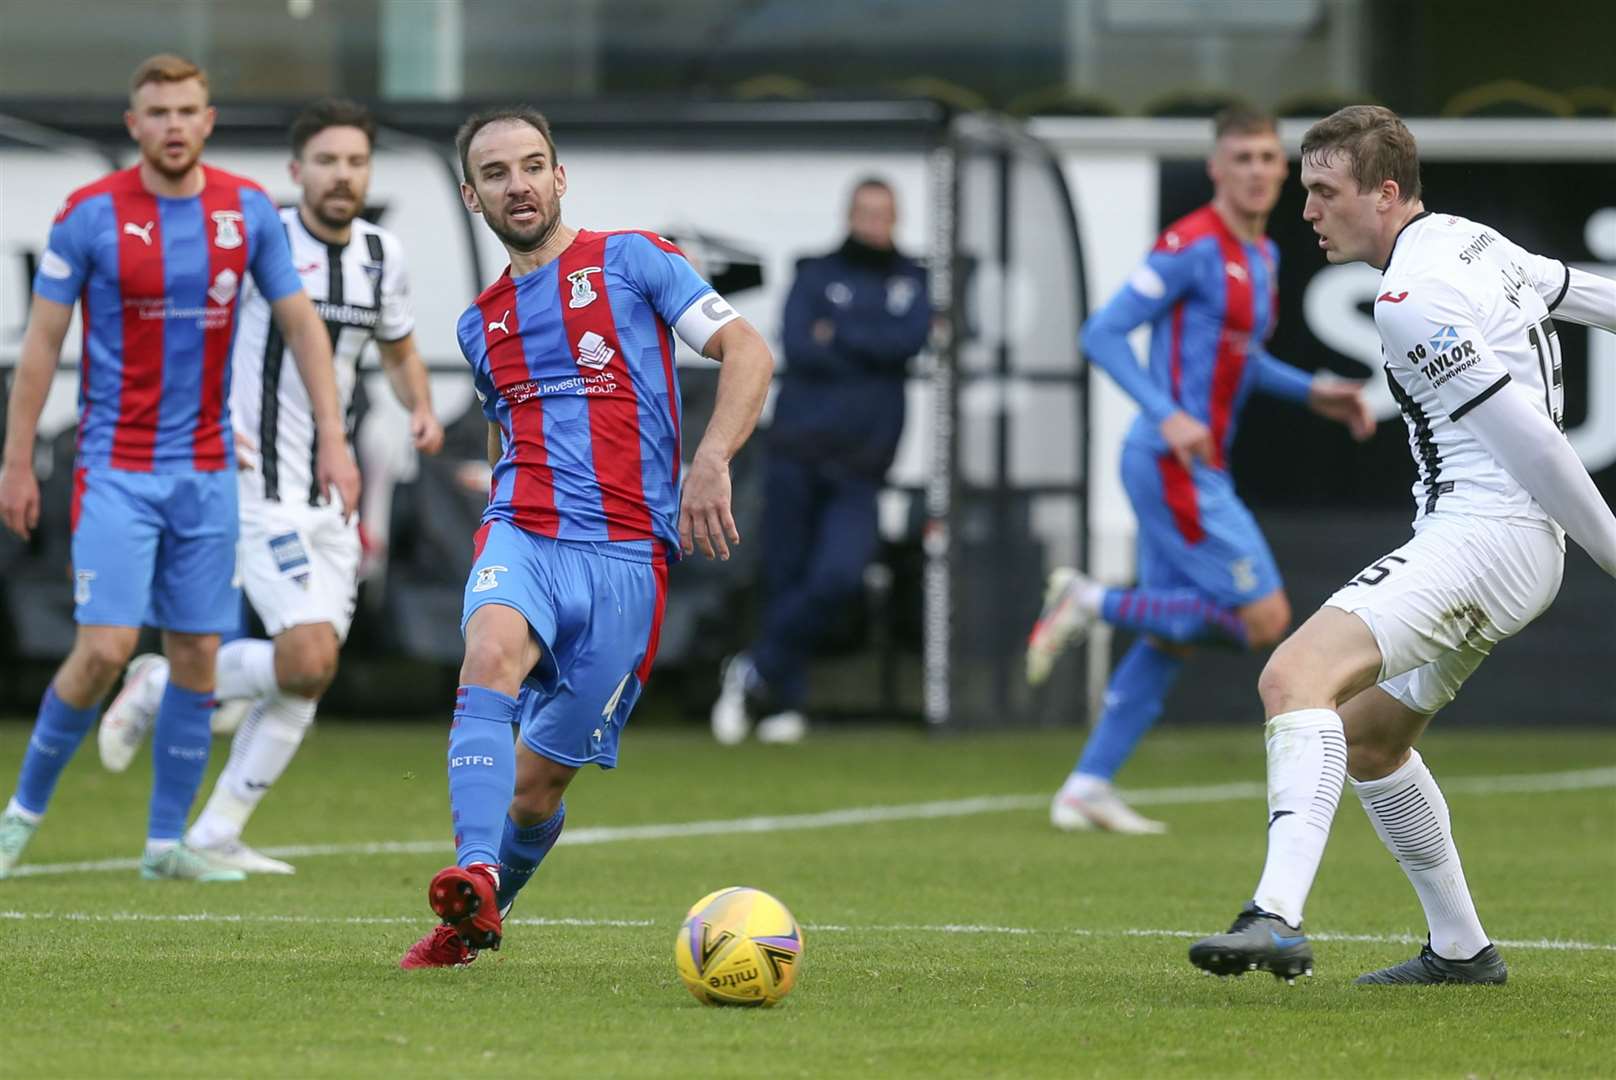 Picture - Ken Macpherson, Inverness. Dunfermline(3) v Inverness CT(1). 17.10.20. ICT’s Sean Welsh plays the ball past Dunfermline's Iain Wilson.